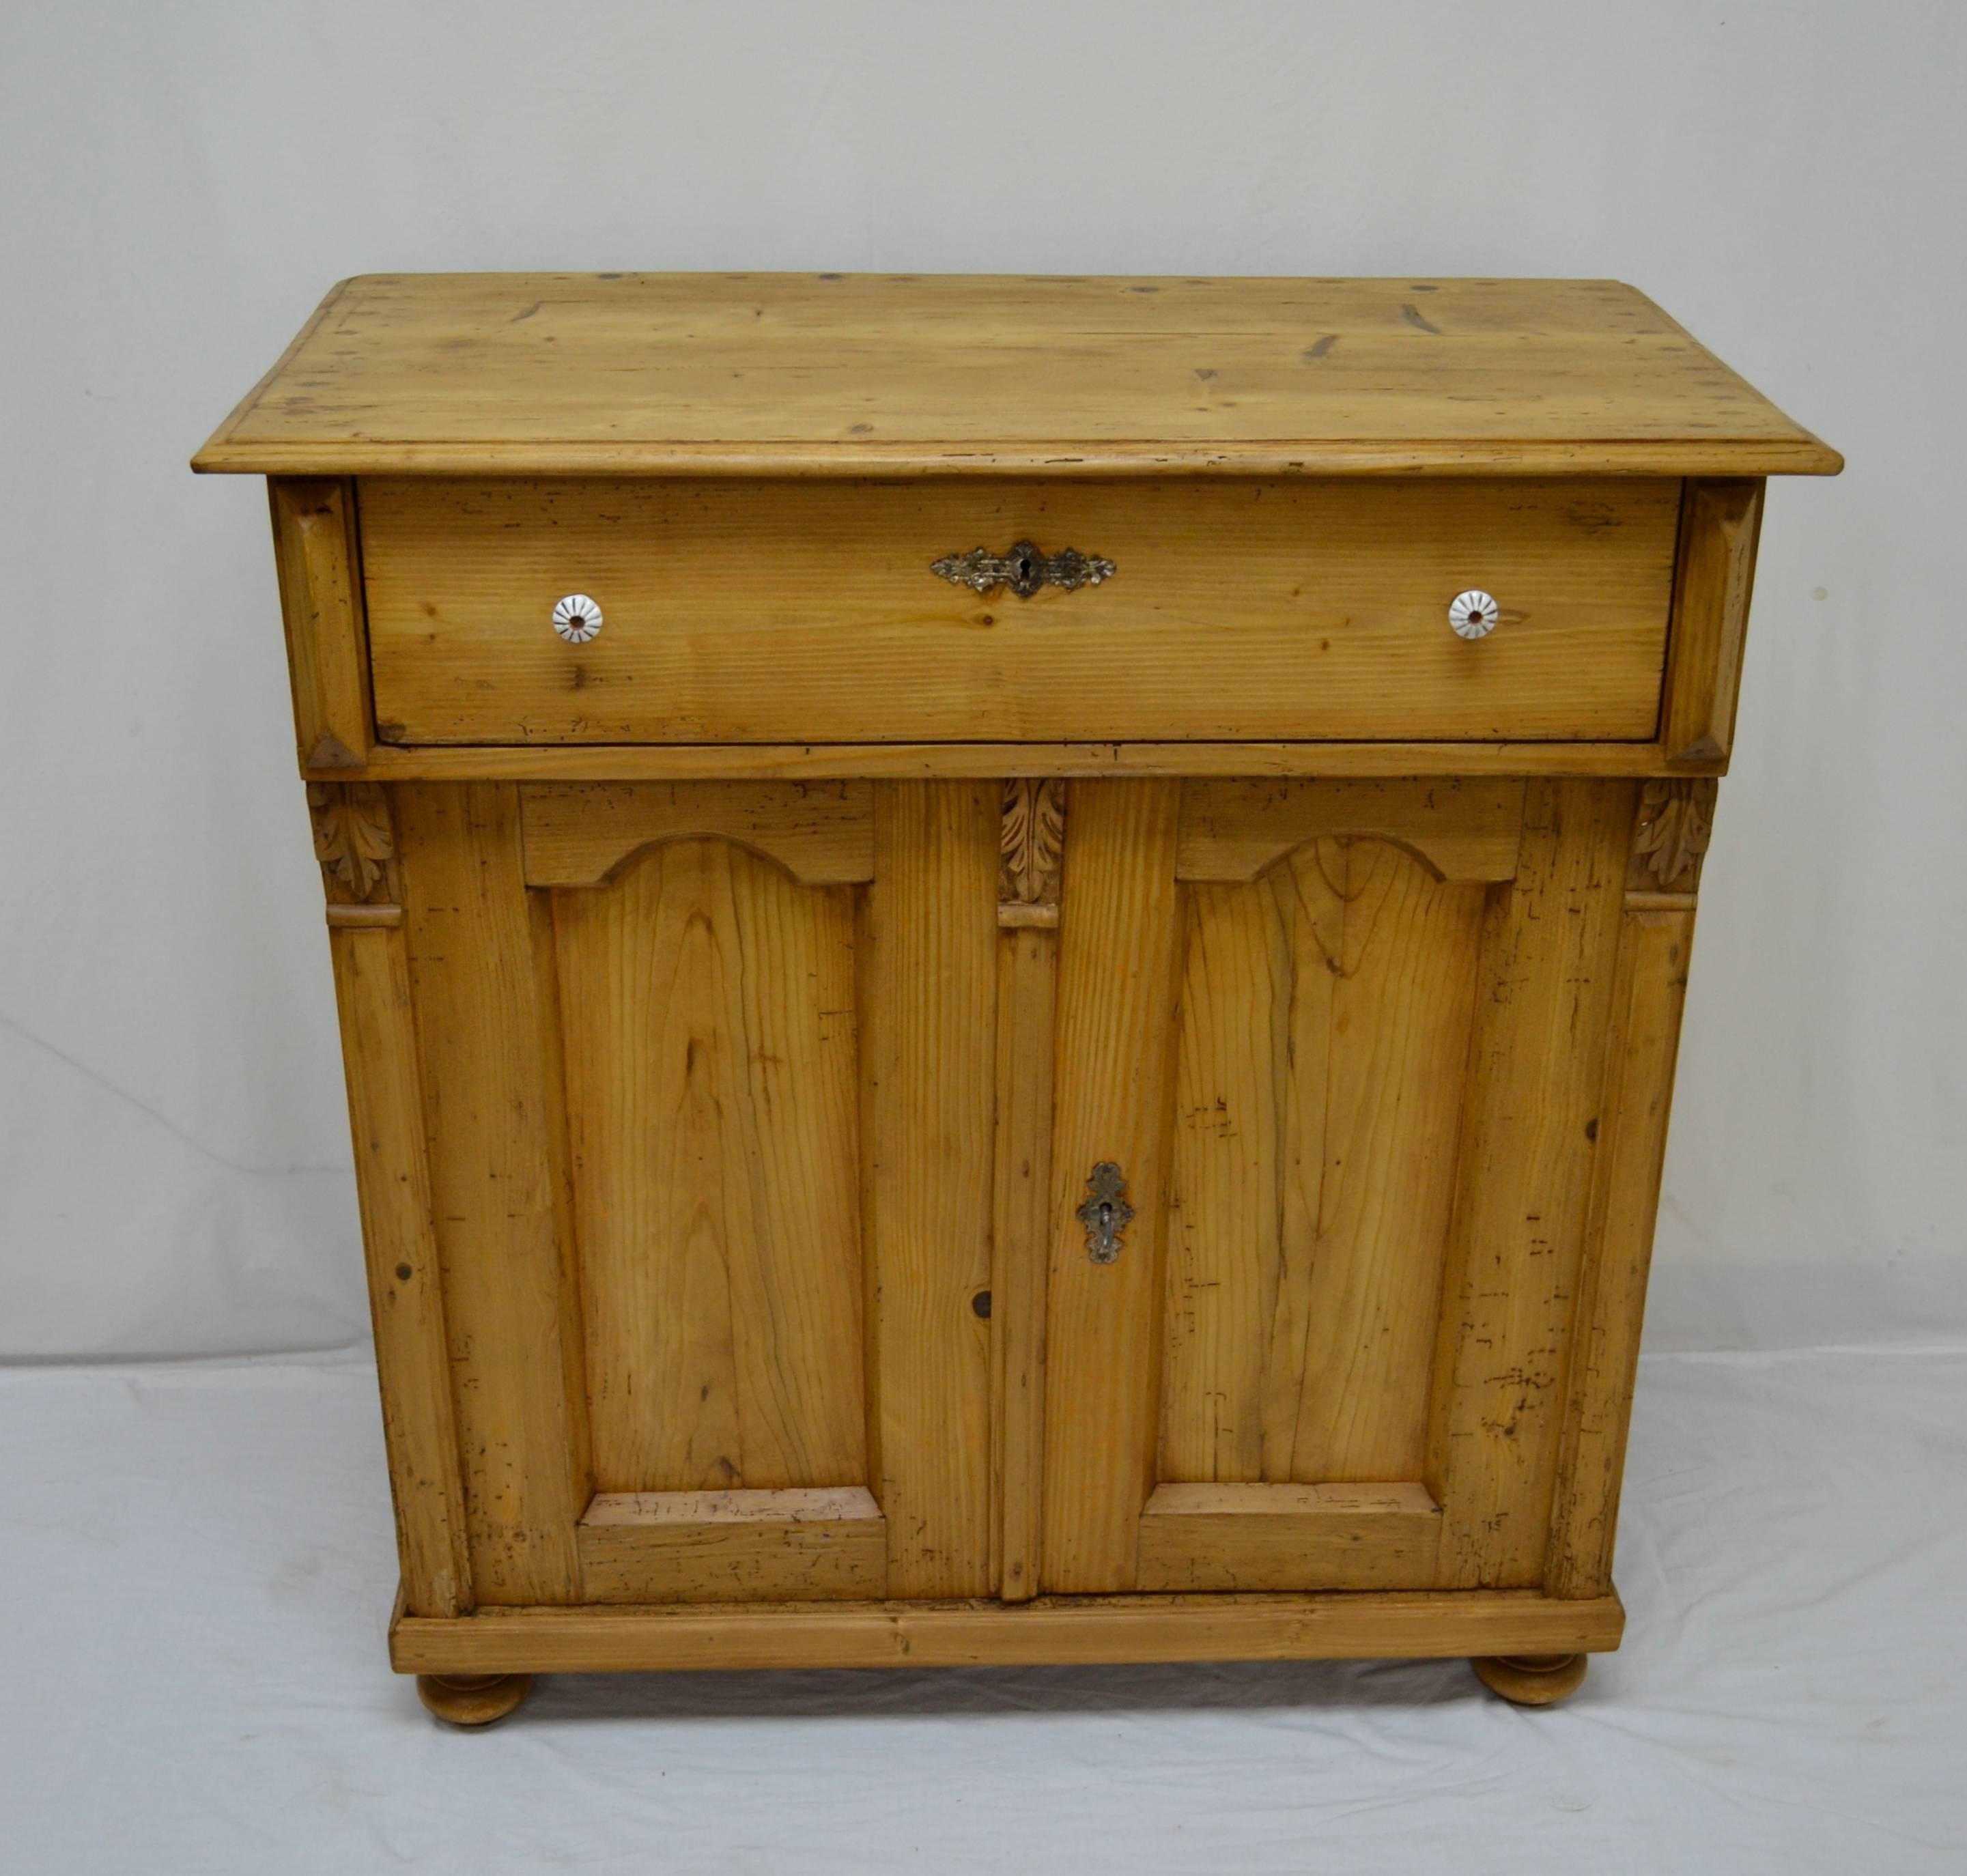 This is a very attractive tall and narrow pine dresser base. A single hand-cut dovetailed drawer sits above two doors with arched panels, flanked and separated by bold fluted molding and hand-carved acanthus leaf corbels. There is a single central